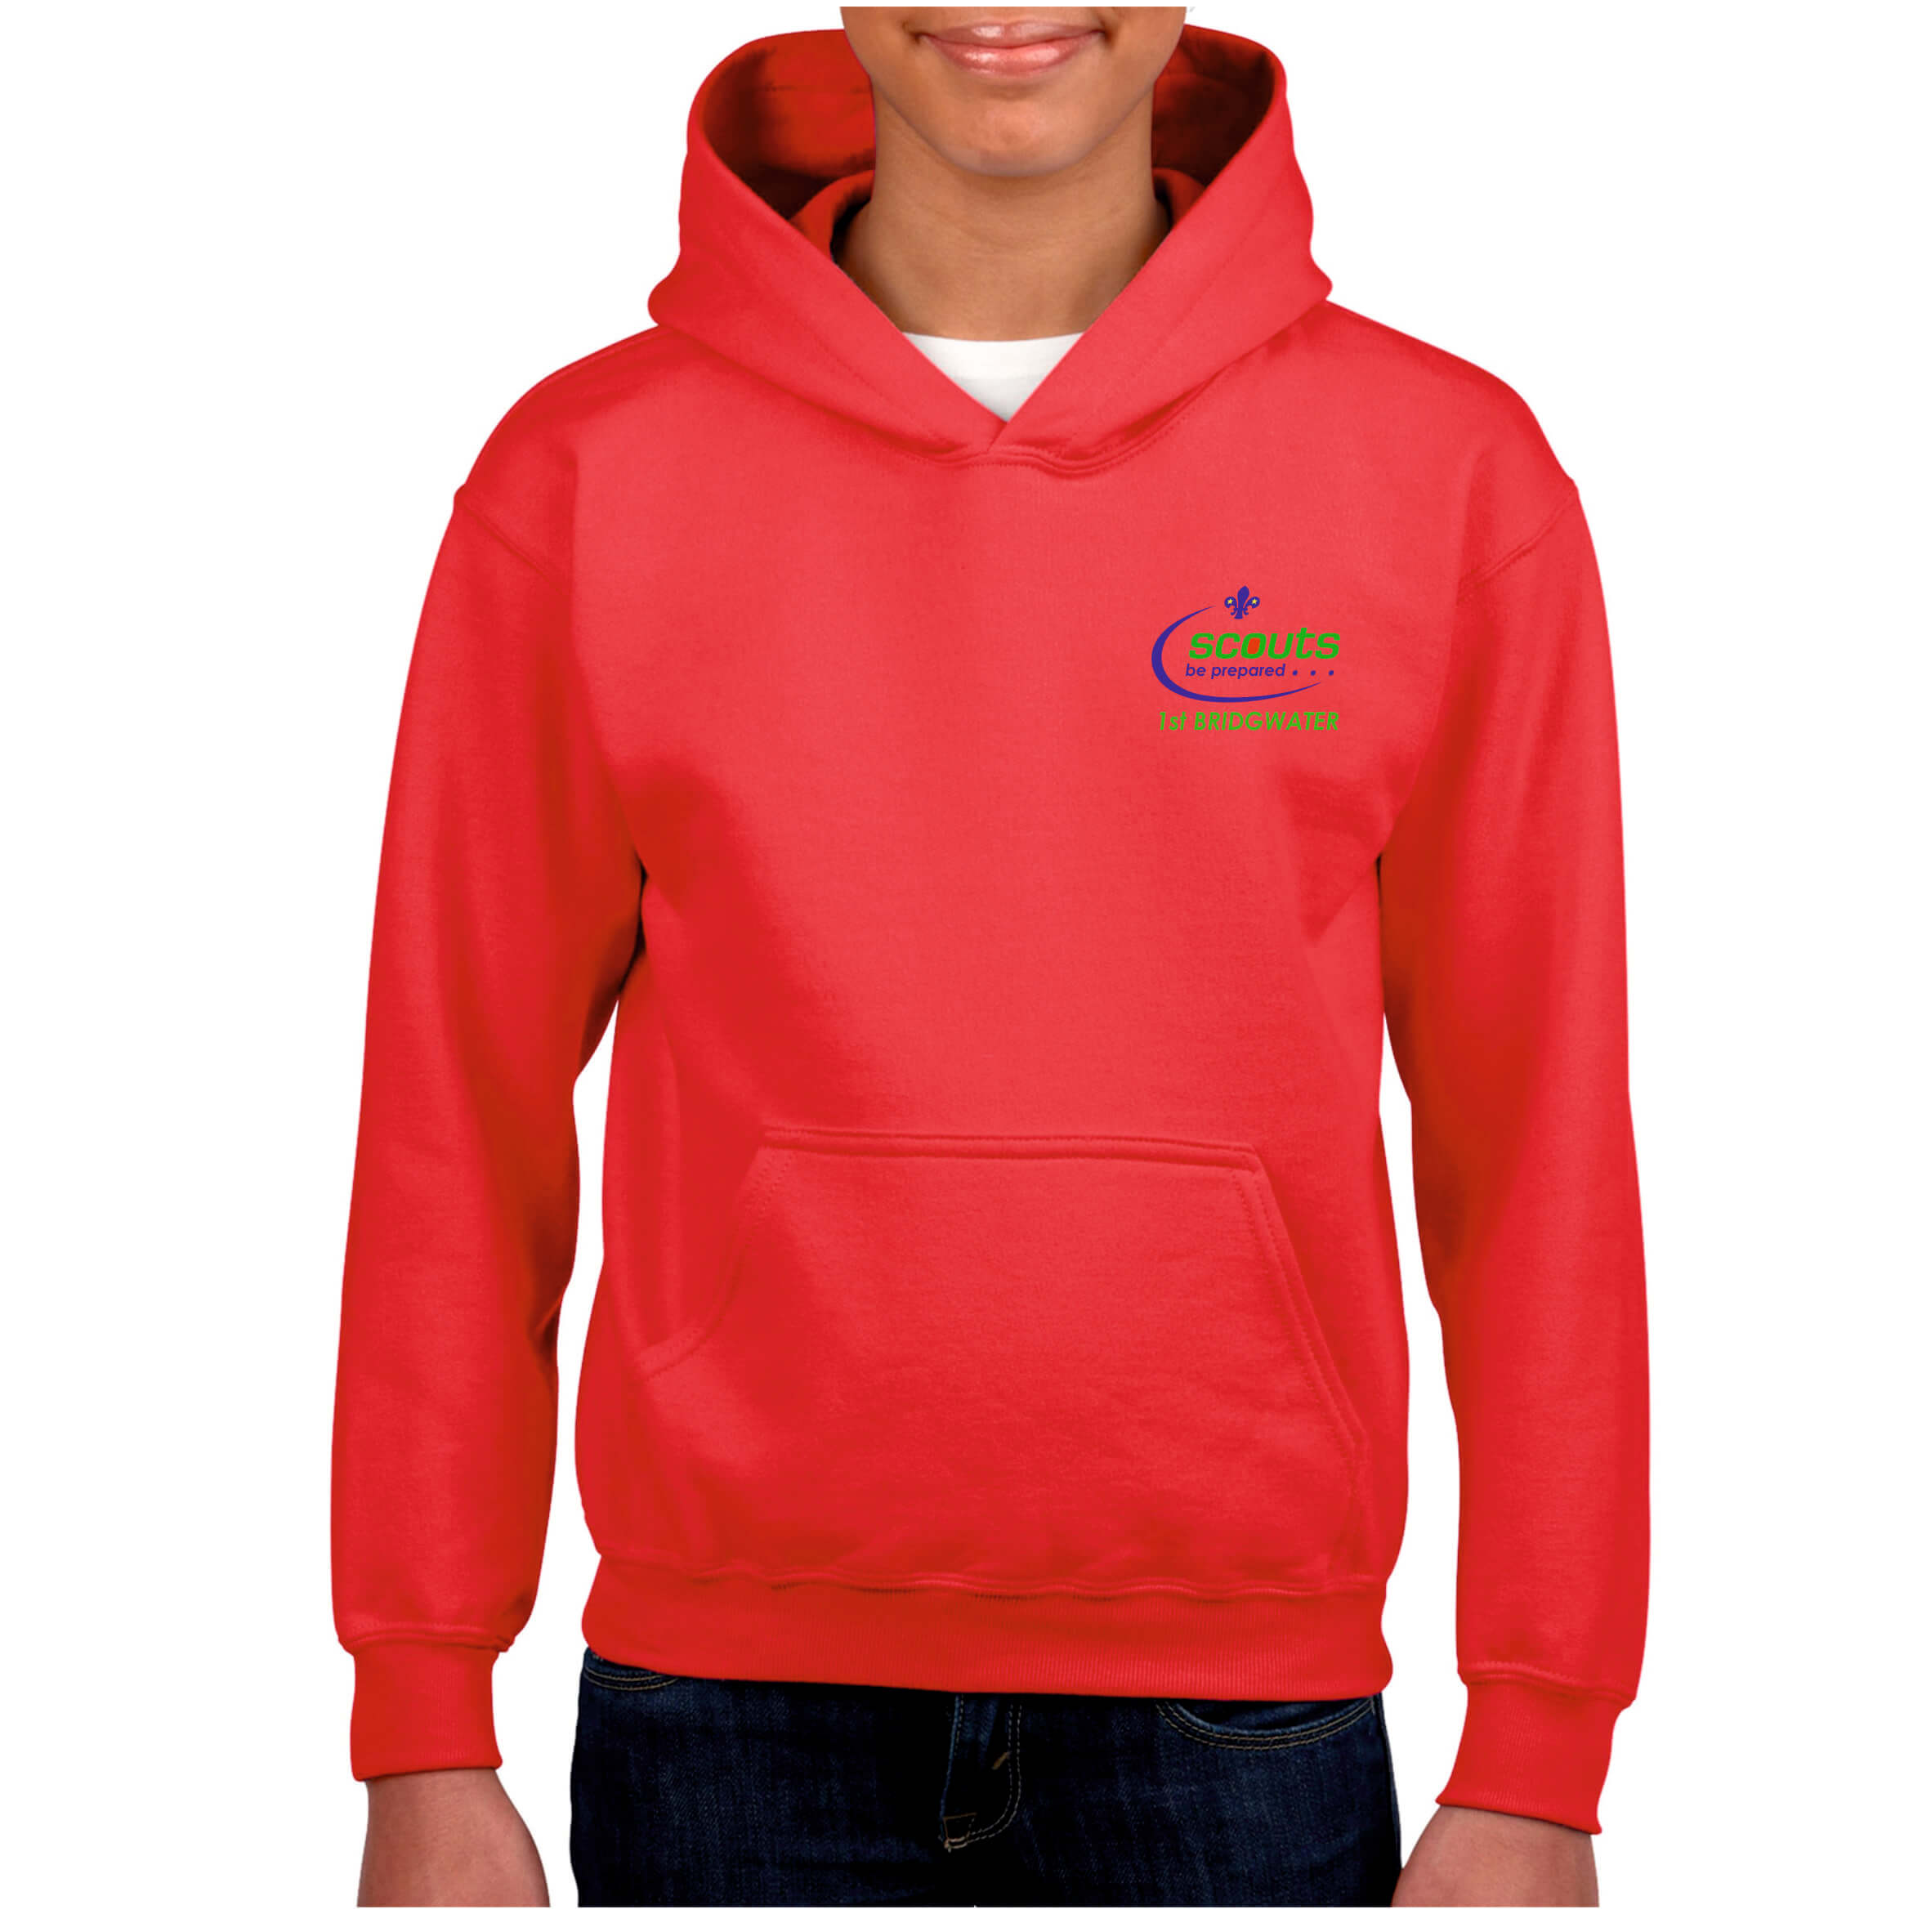 1st BW Scouts - Scouts - Hoody - GD57/GD57B | Jual Branded Clothing ...